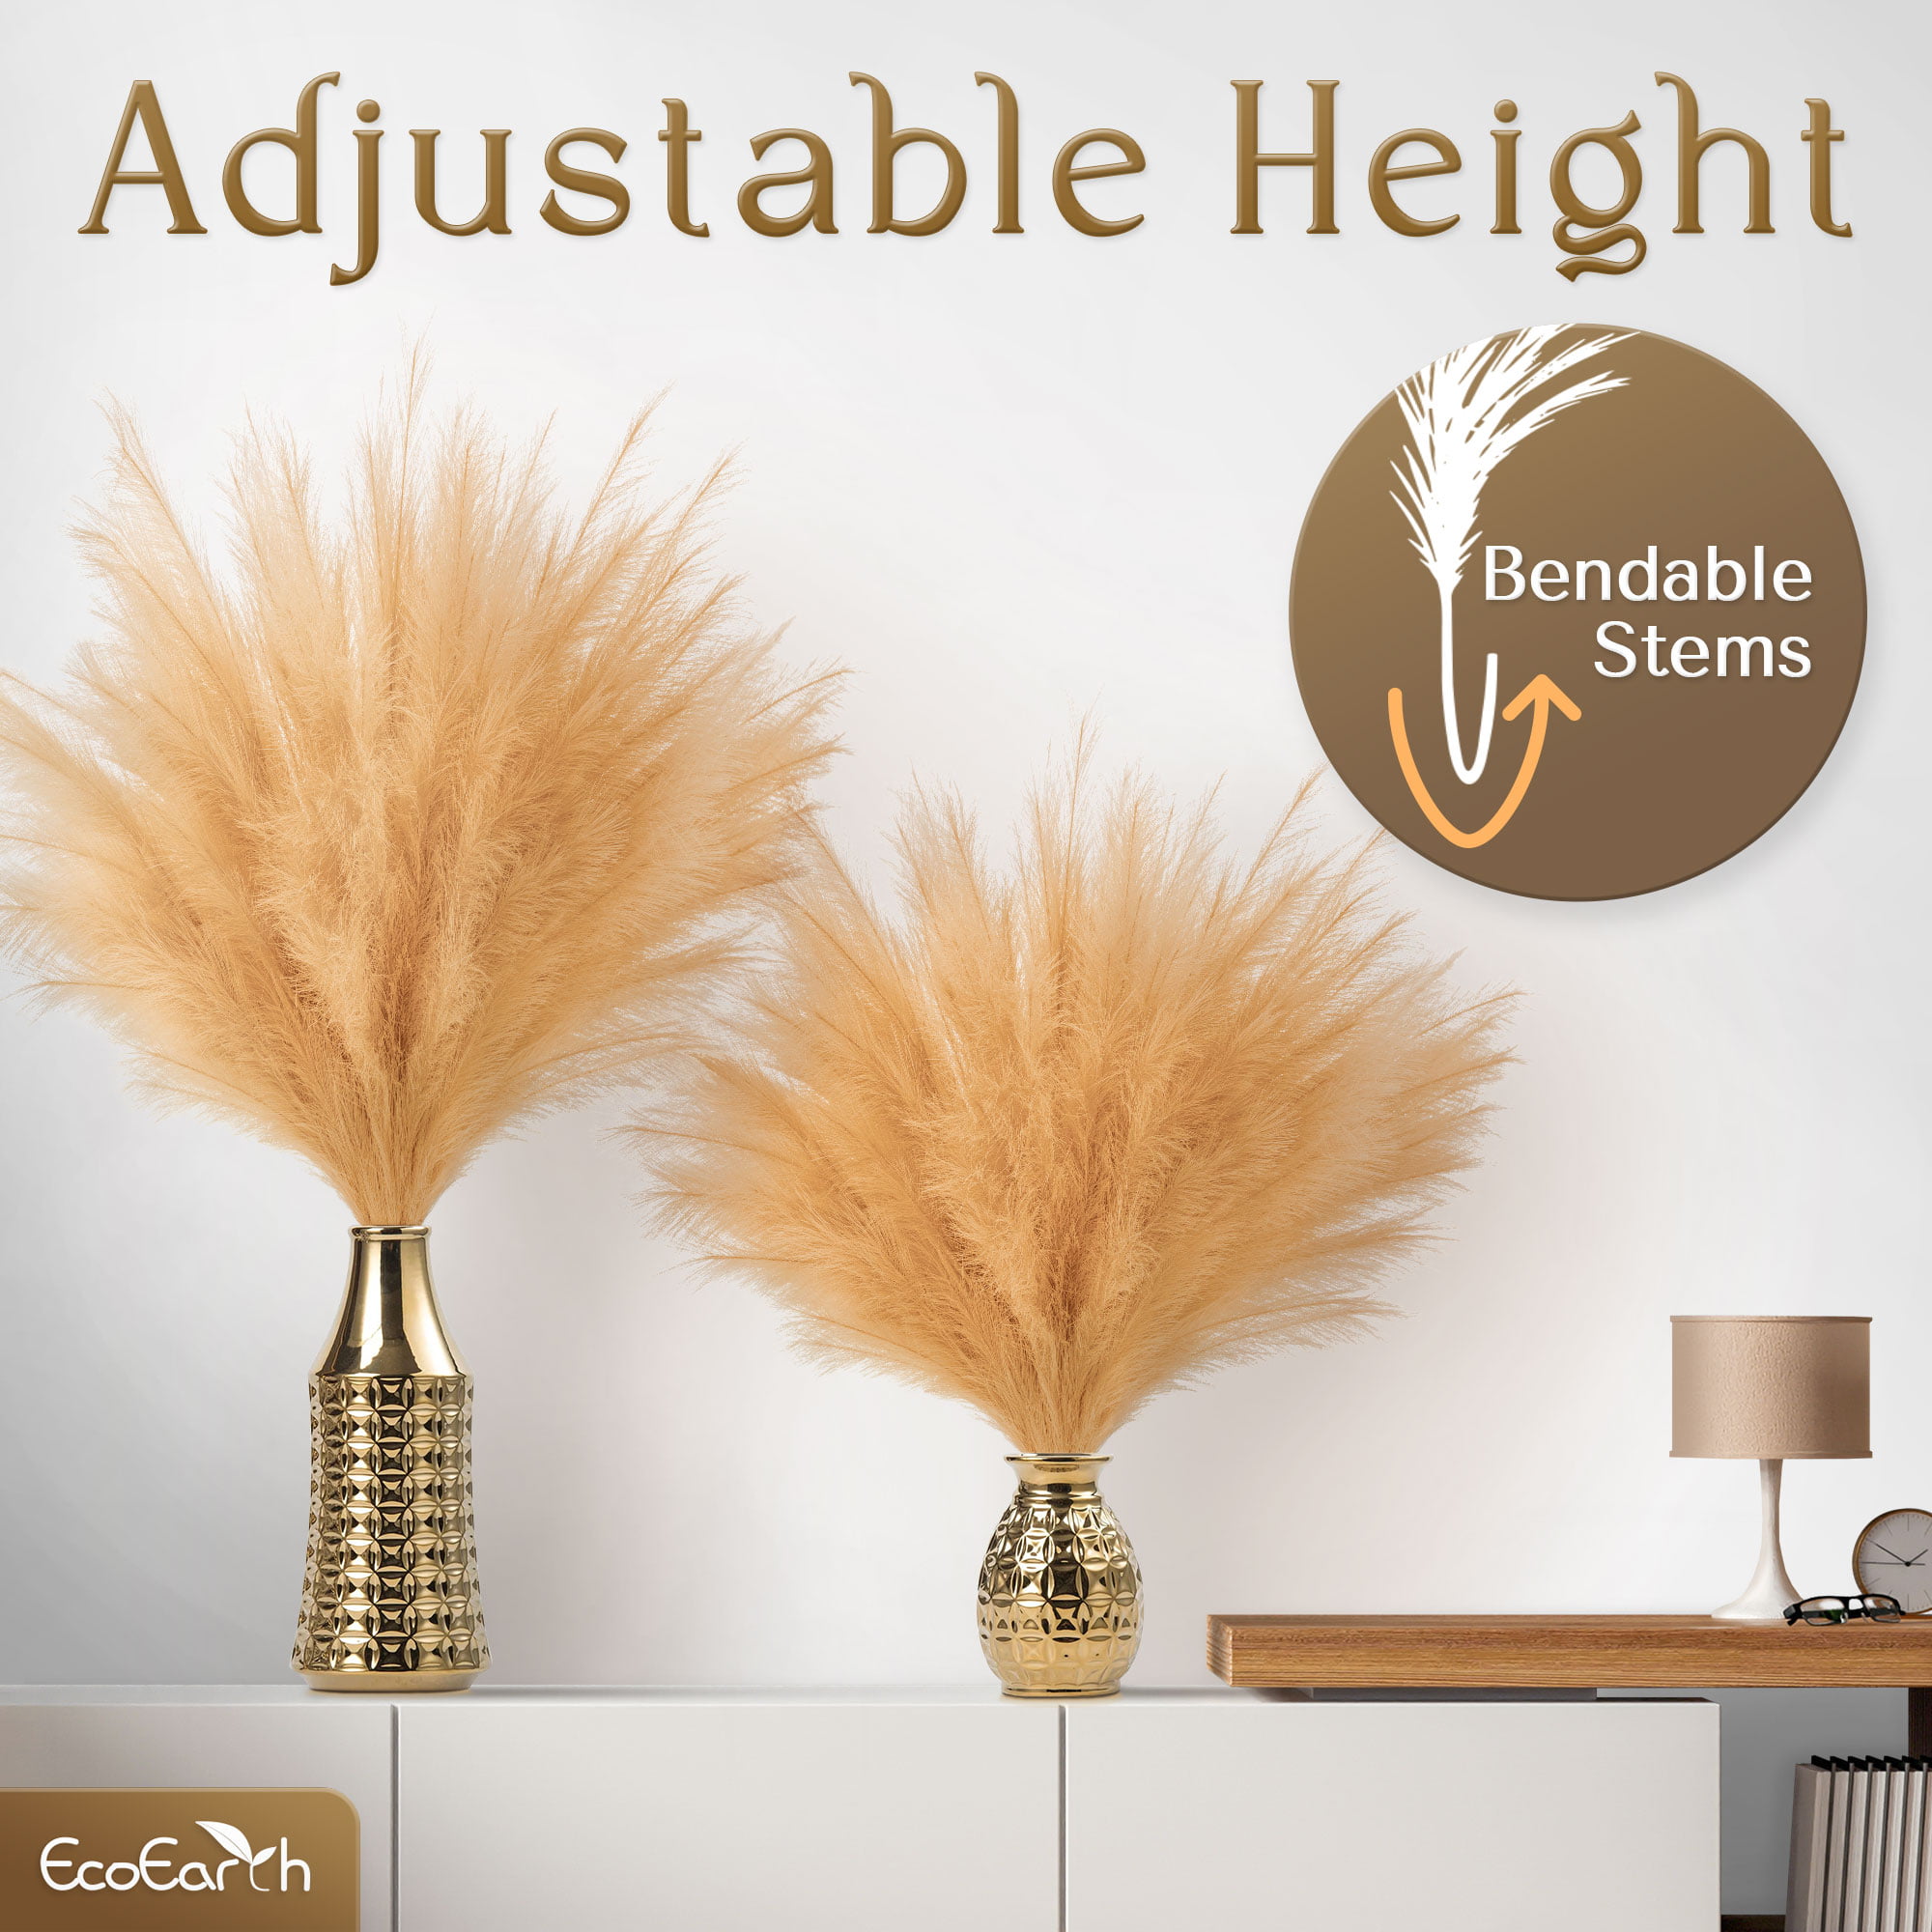 Faux Pampas Grass Pink Blossom Blvd - 3 43 Stems Fluffy pink feathers for  vases - Pink Boho Decor - tall pampas grass for floor vase - pink